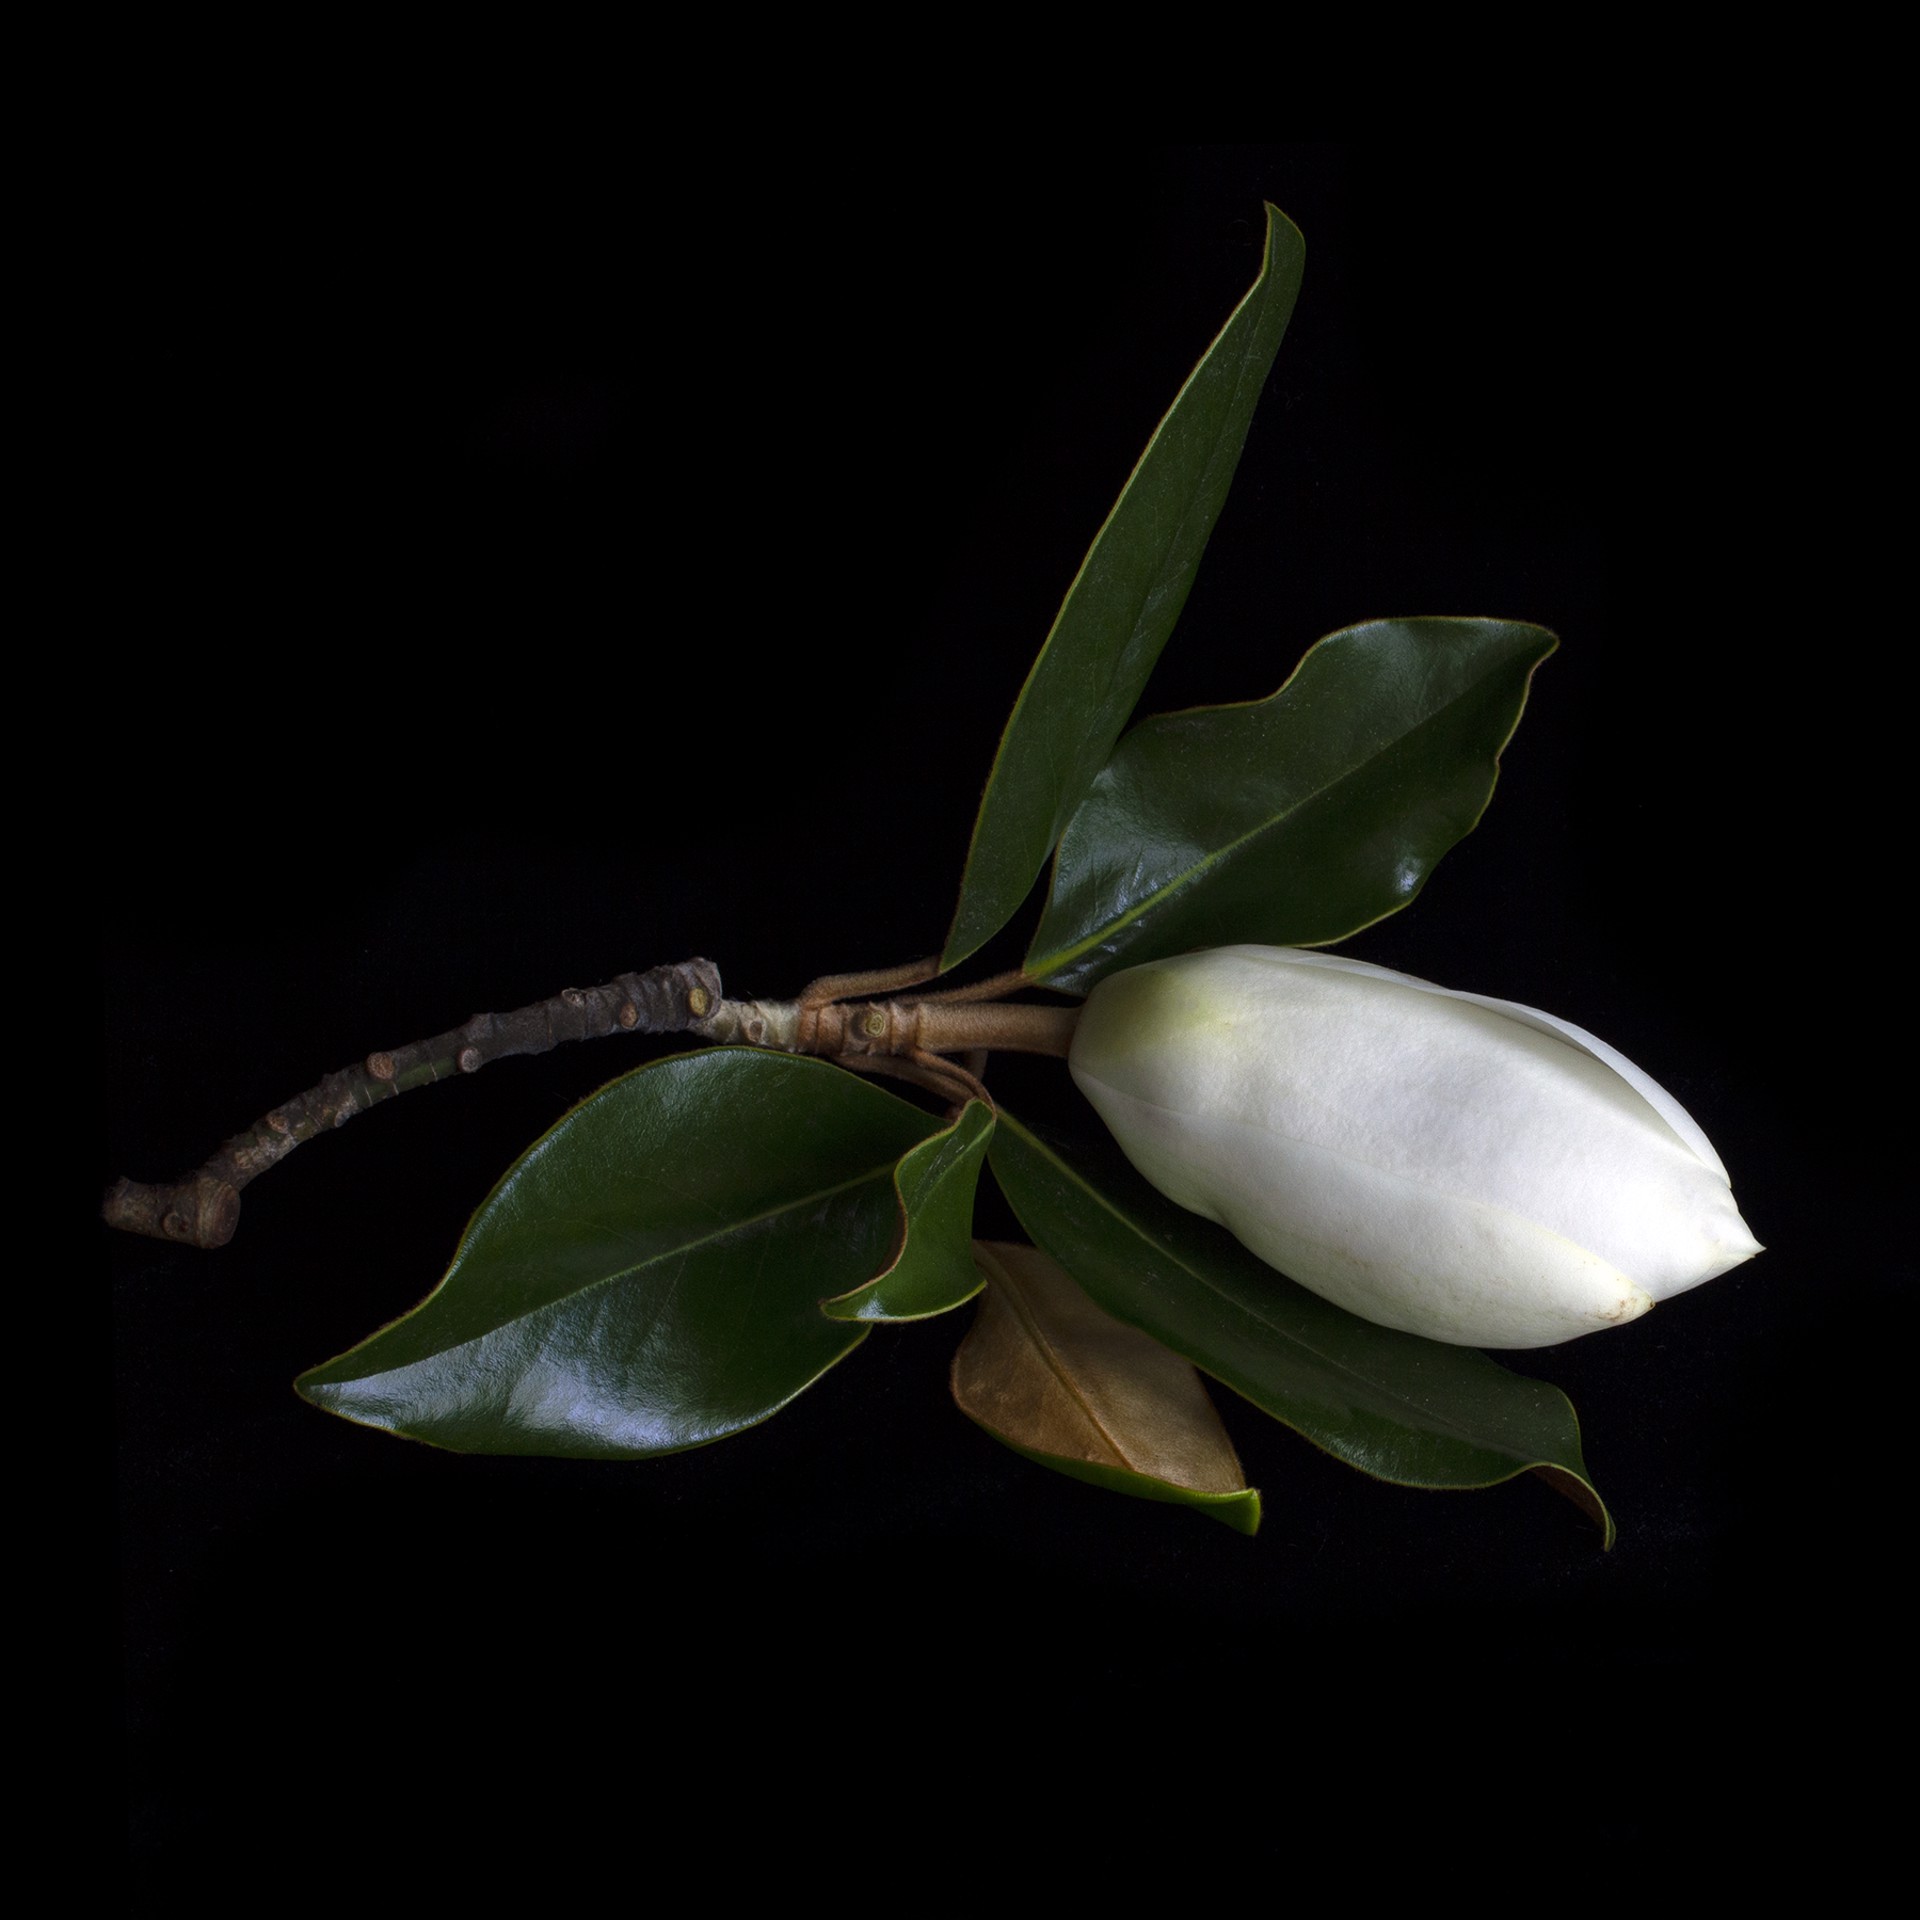 Magnolia, 1432 by Molly Wood